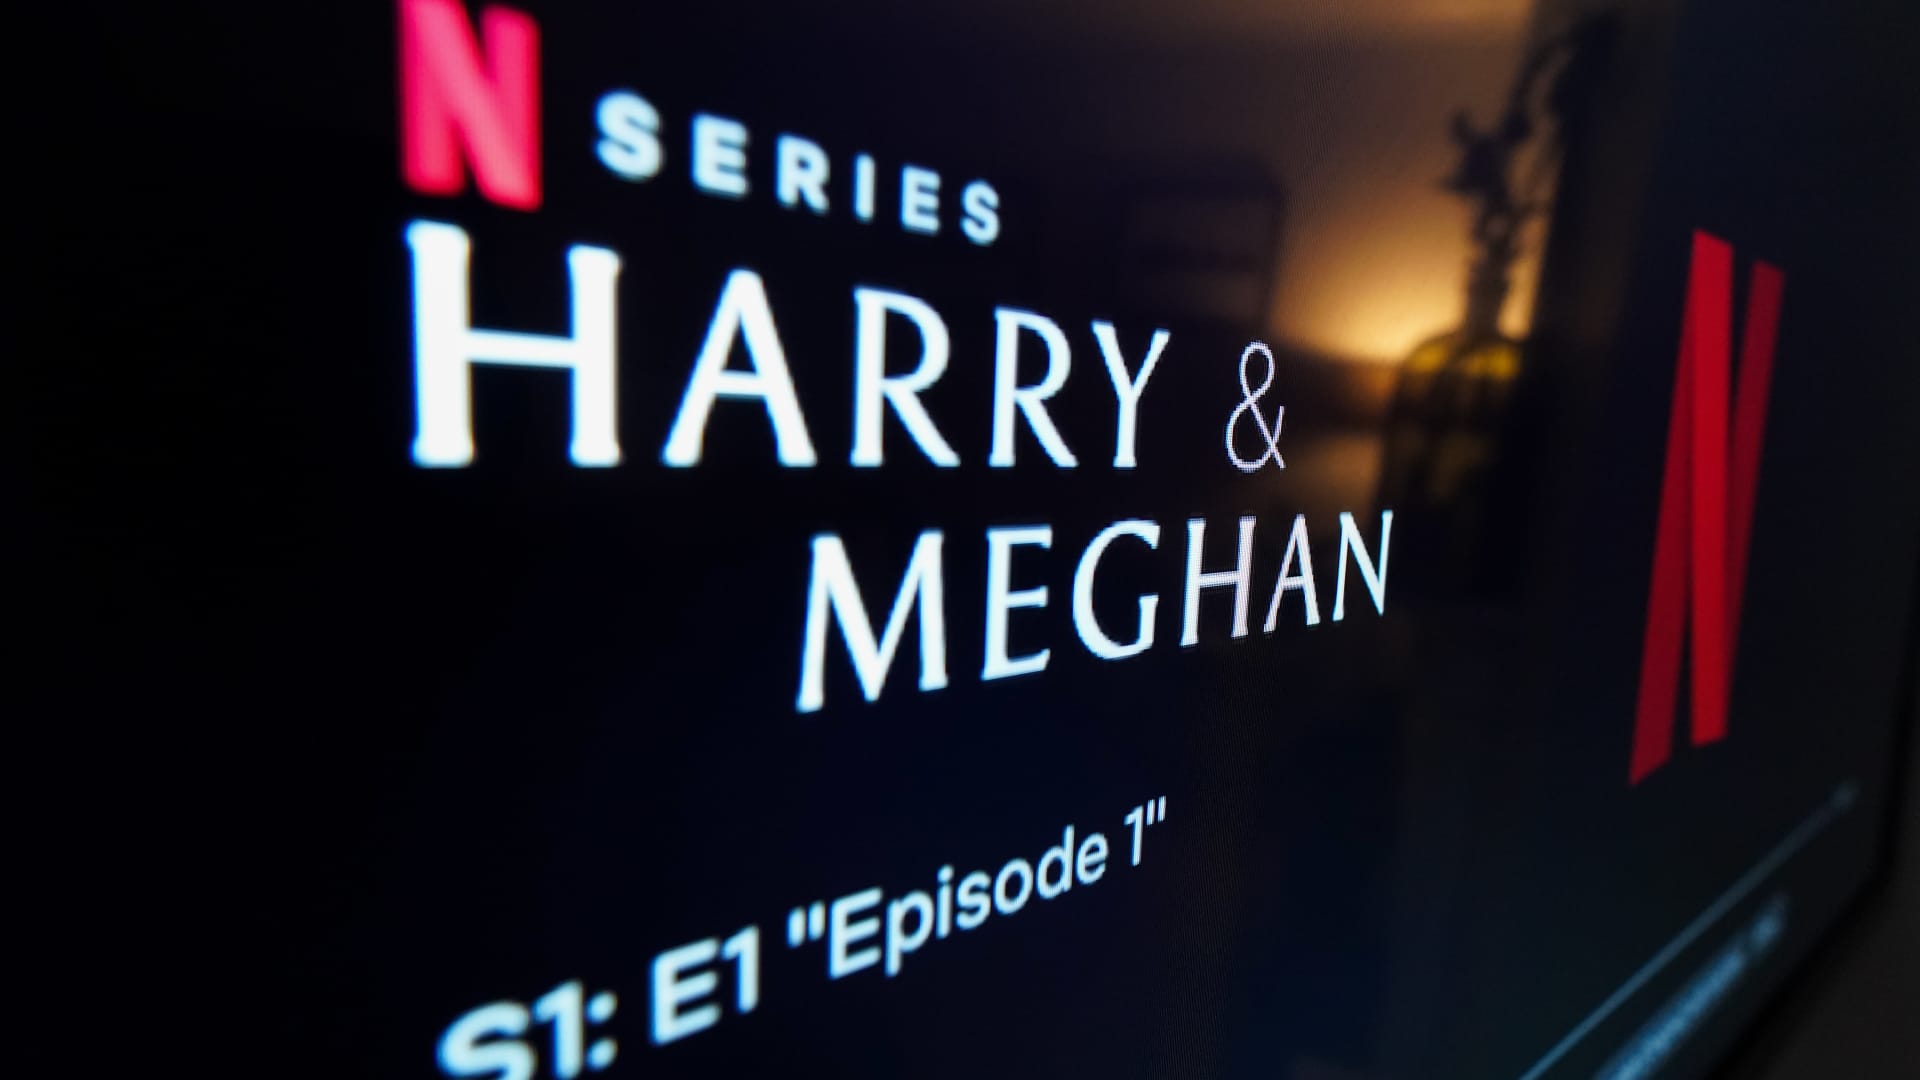 Harry & Meghan, the hotly-anticipated new Netflix documentary from the Duke and Duchess of Sussex, has been released.